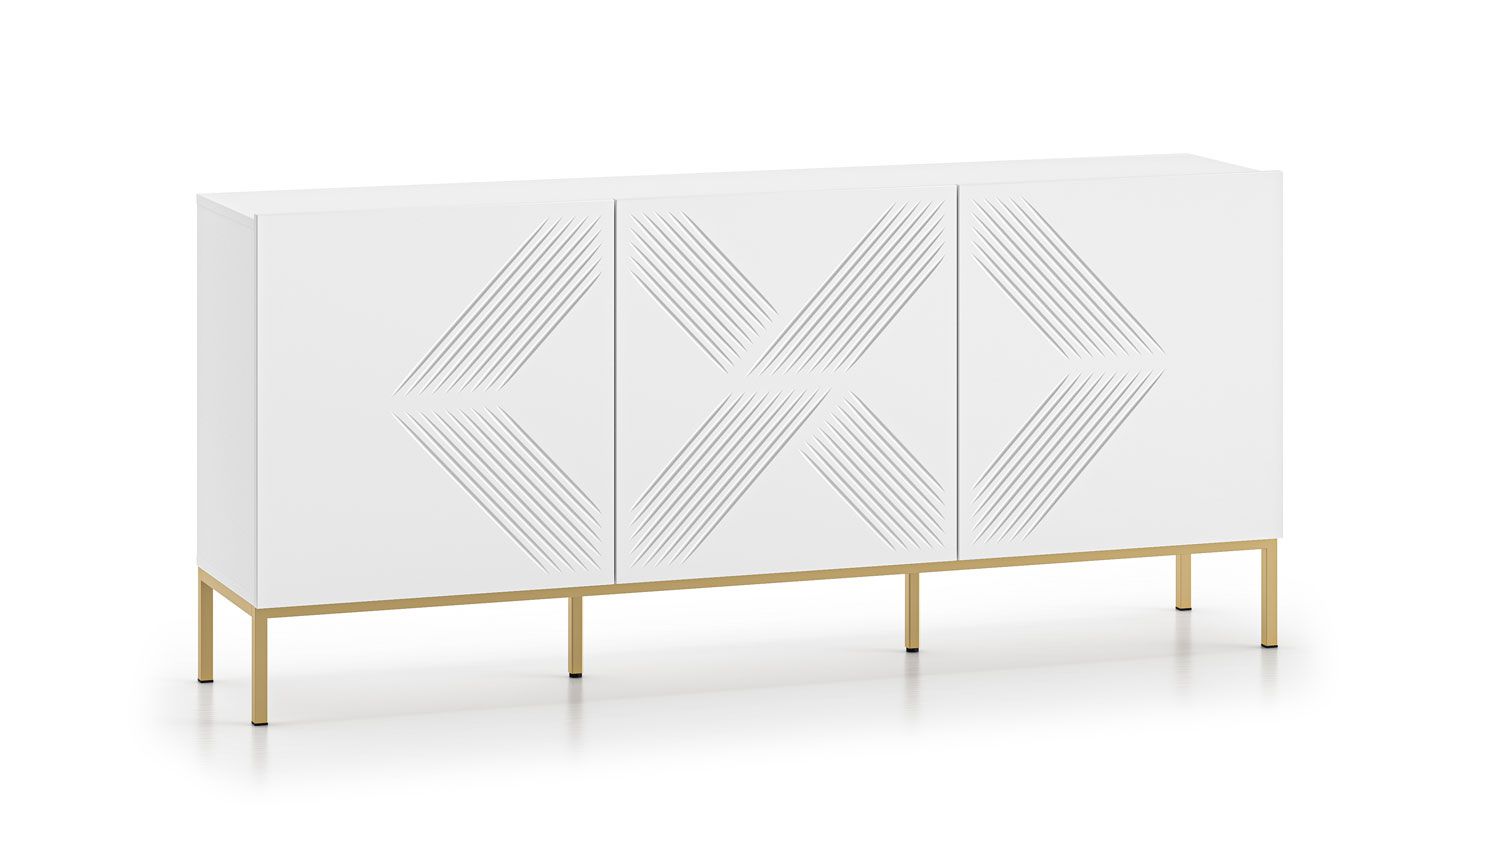 Sideboard / chest of drawers with a stylish Taos 08 front, color: white matt, legs: gold, dimensions: 77 x 170 x 37 cm, with three doors, six compartments